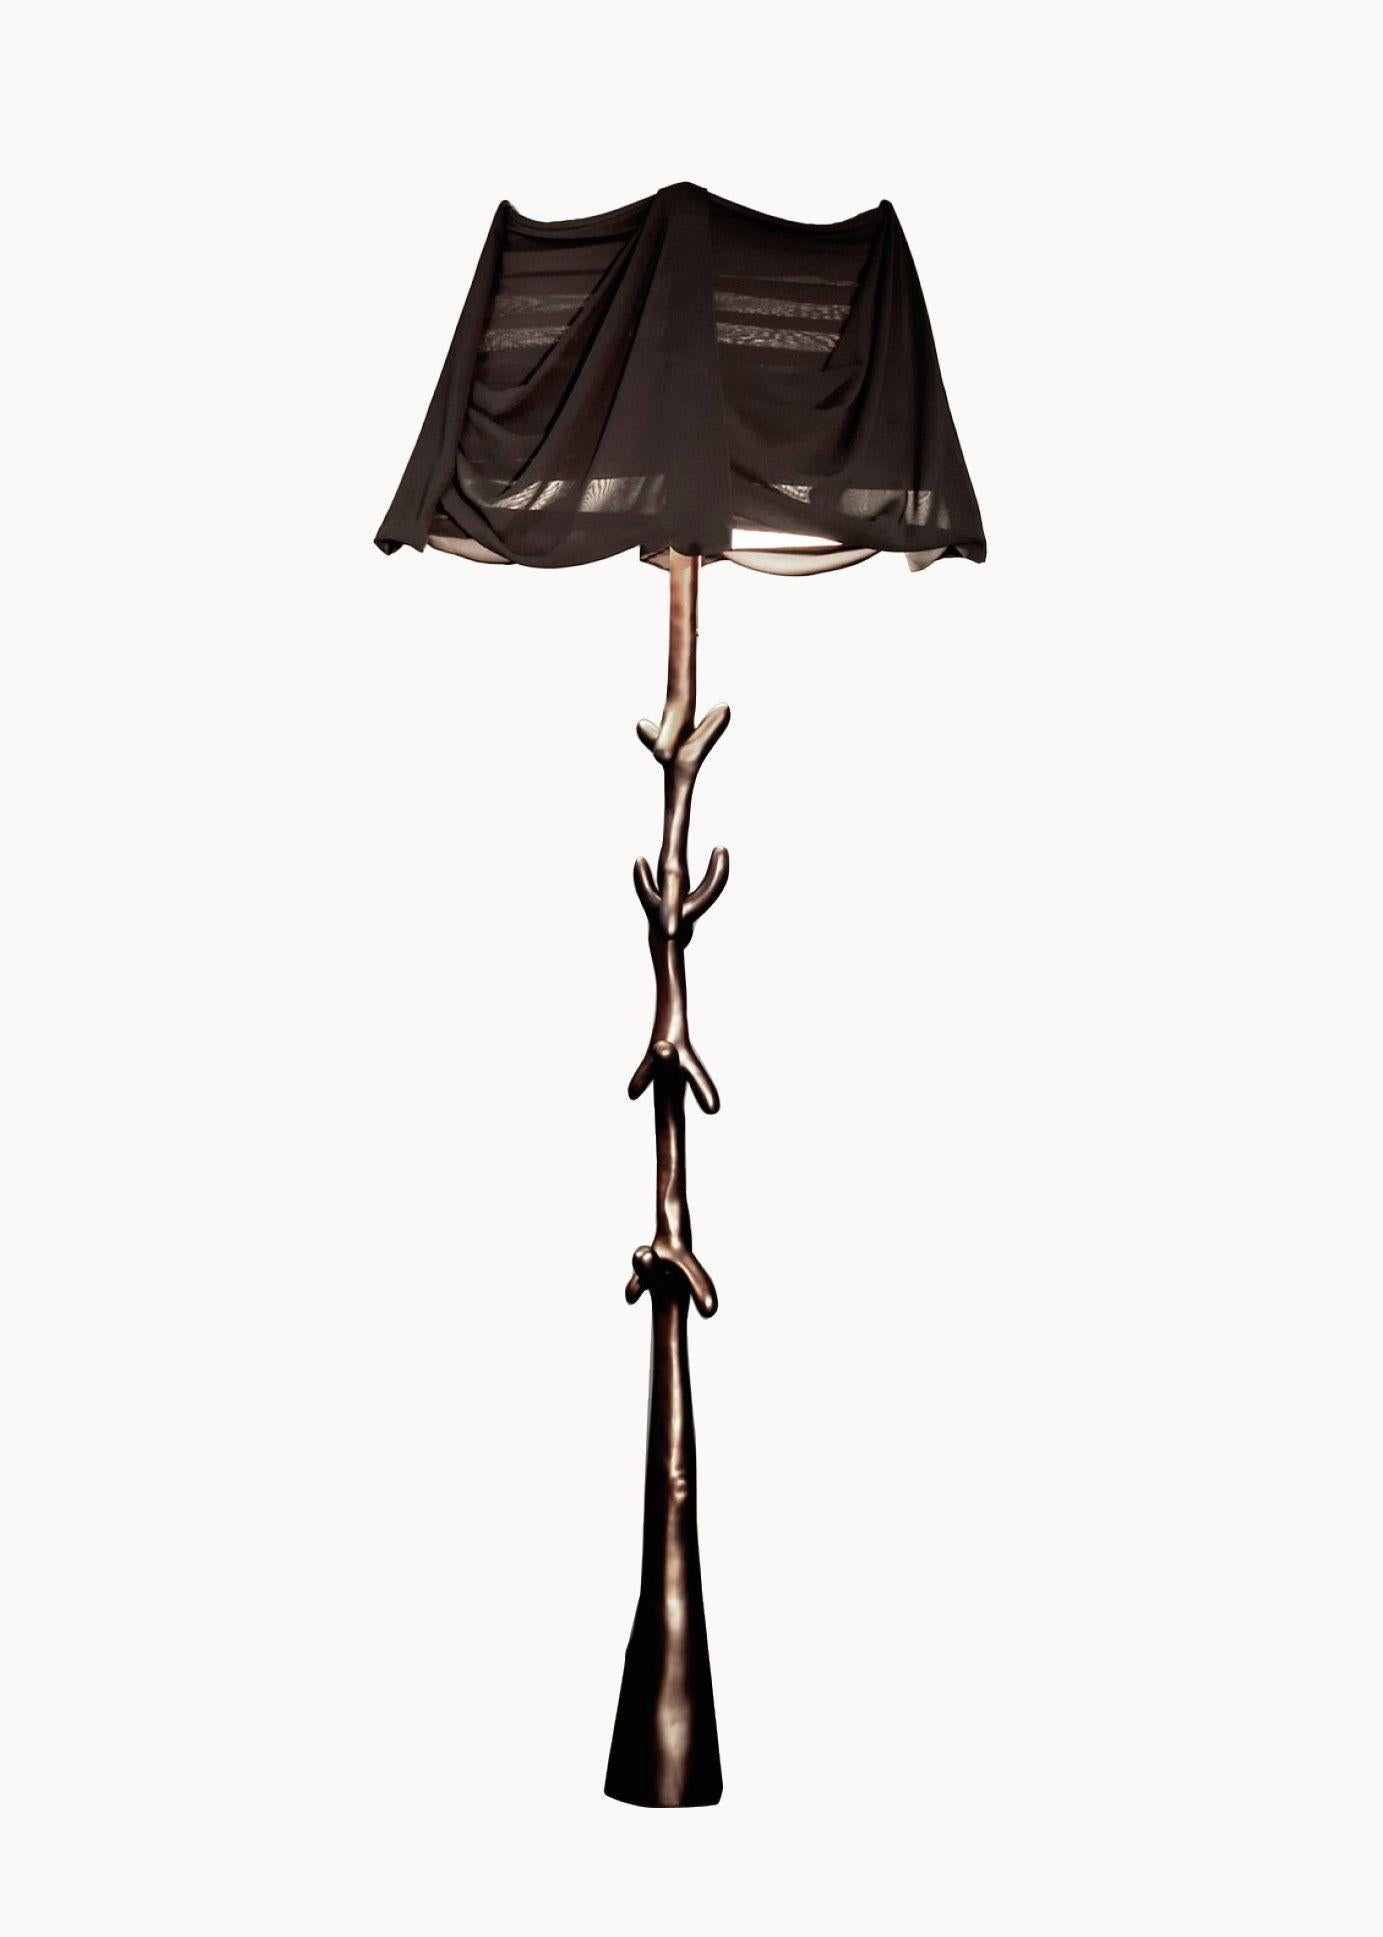 Muletas Pair of lamps designed by Salvador Dali manufactured by BD furniture in Barcelona.

Limited Edition
Dyed Lime Wood satin in black.
Lampshade in Transparent Black Chiffon.

Refined materials and handcrafted manufacturing to bring up to date a